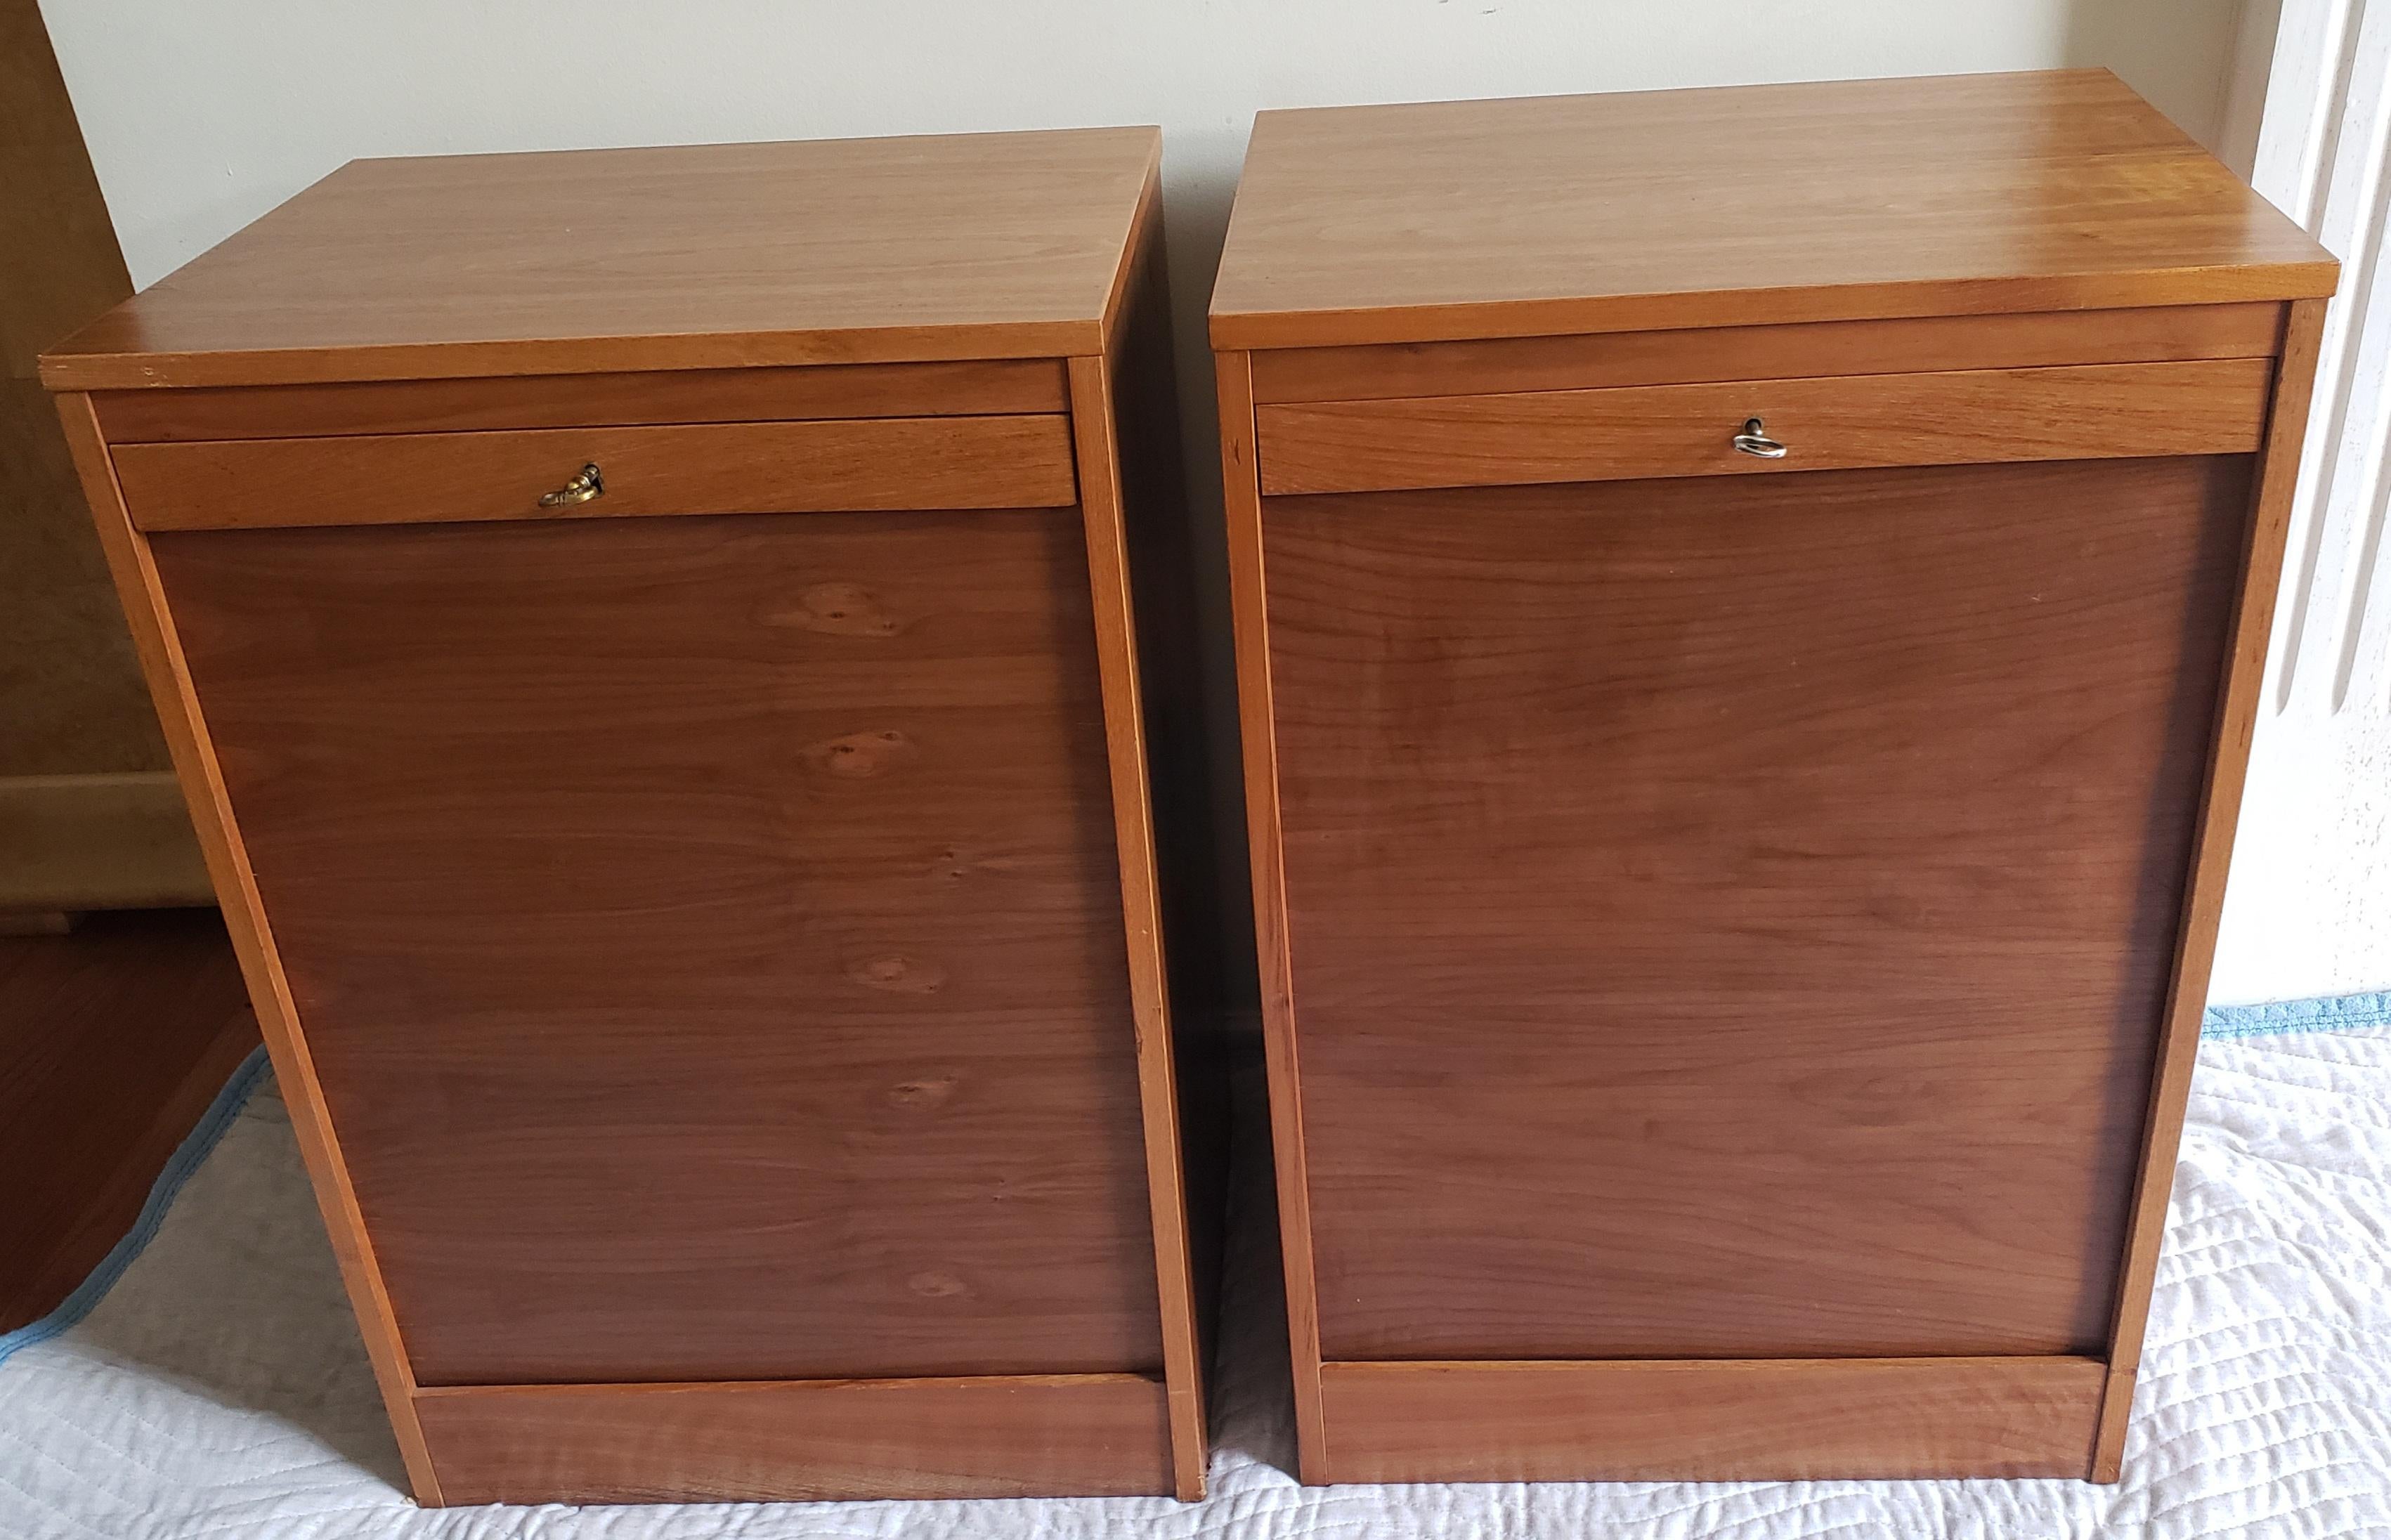 1970s vintage Danish modern 7-drawer teak Tambour door cabinets with lock.
An excellent example of a lockable (key included) teak finished tambour office haberdashery cabinets attributed to Abbess. These units feature 7 drawers. Traditionally